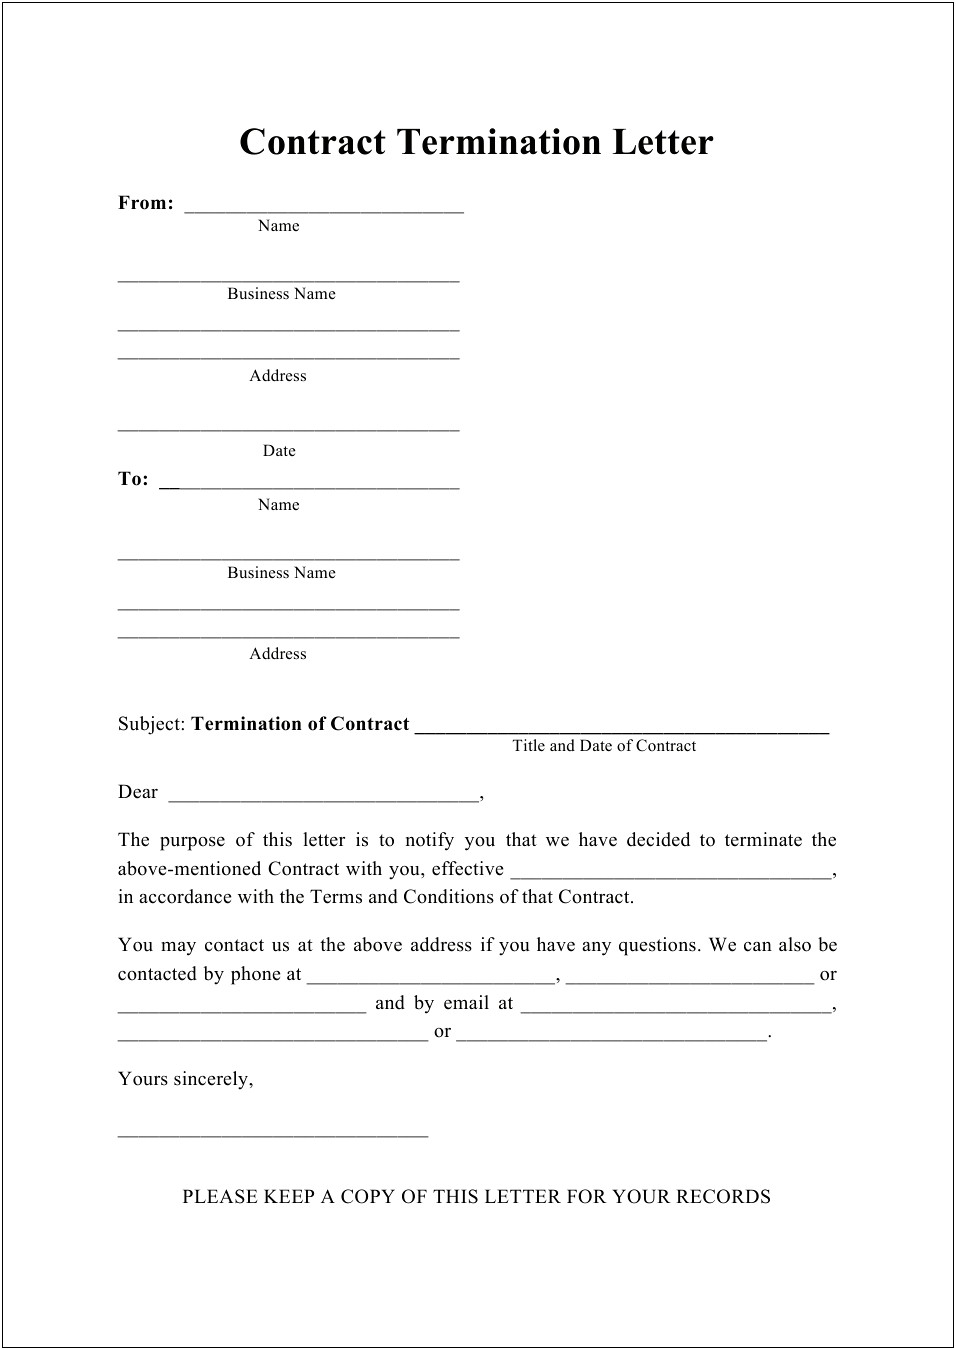 Free Termination Letter Templates For Employee